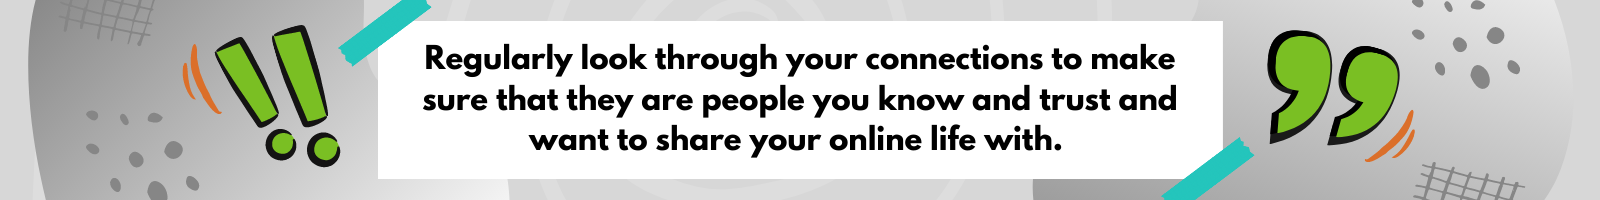 Regularly look through your connections to make sure that they are people you know and trust and want to share your online life with.